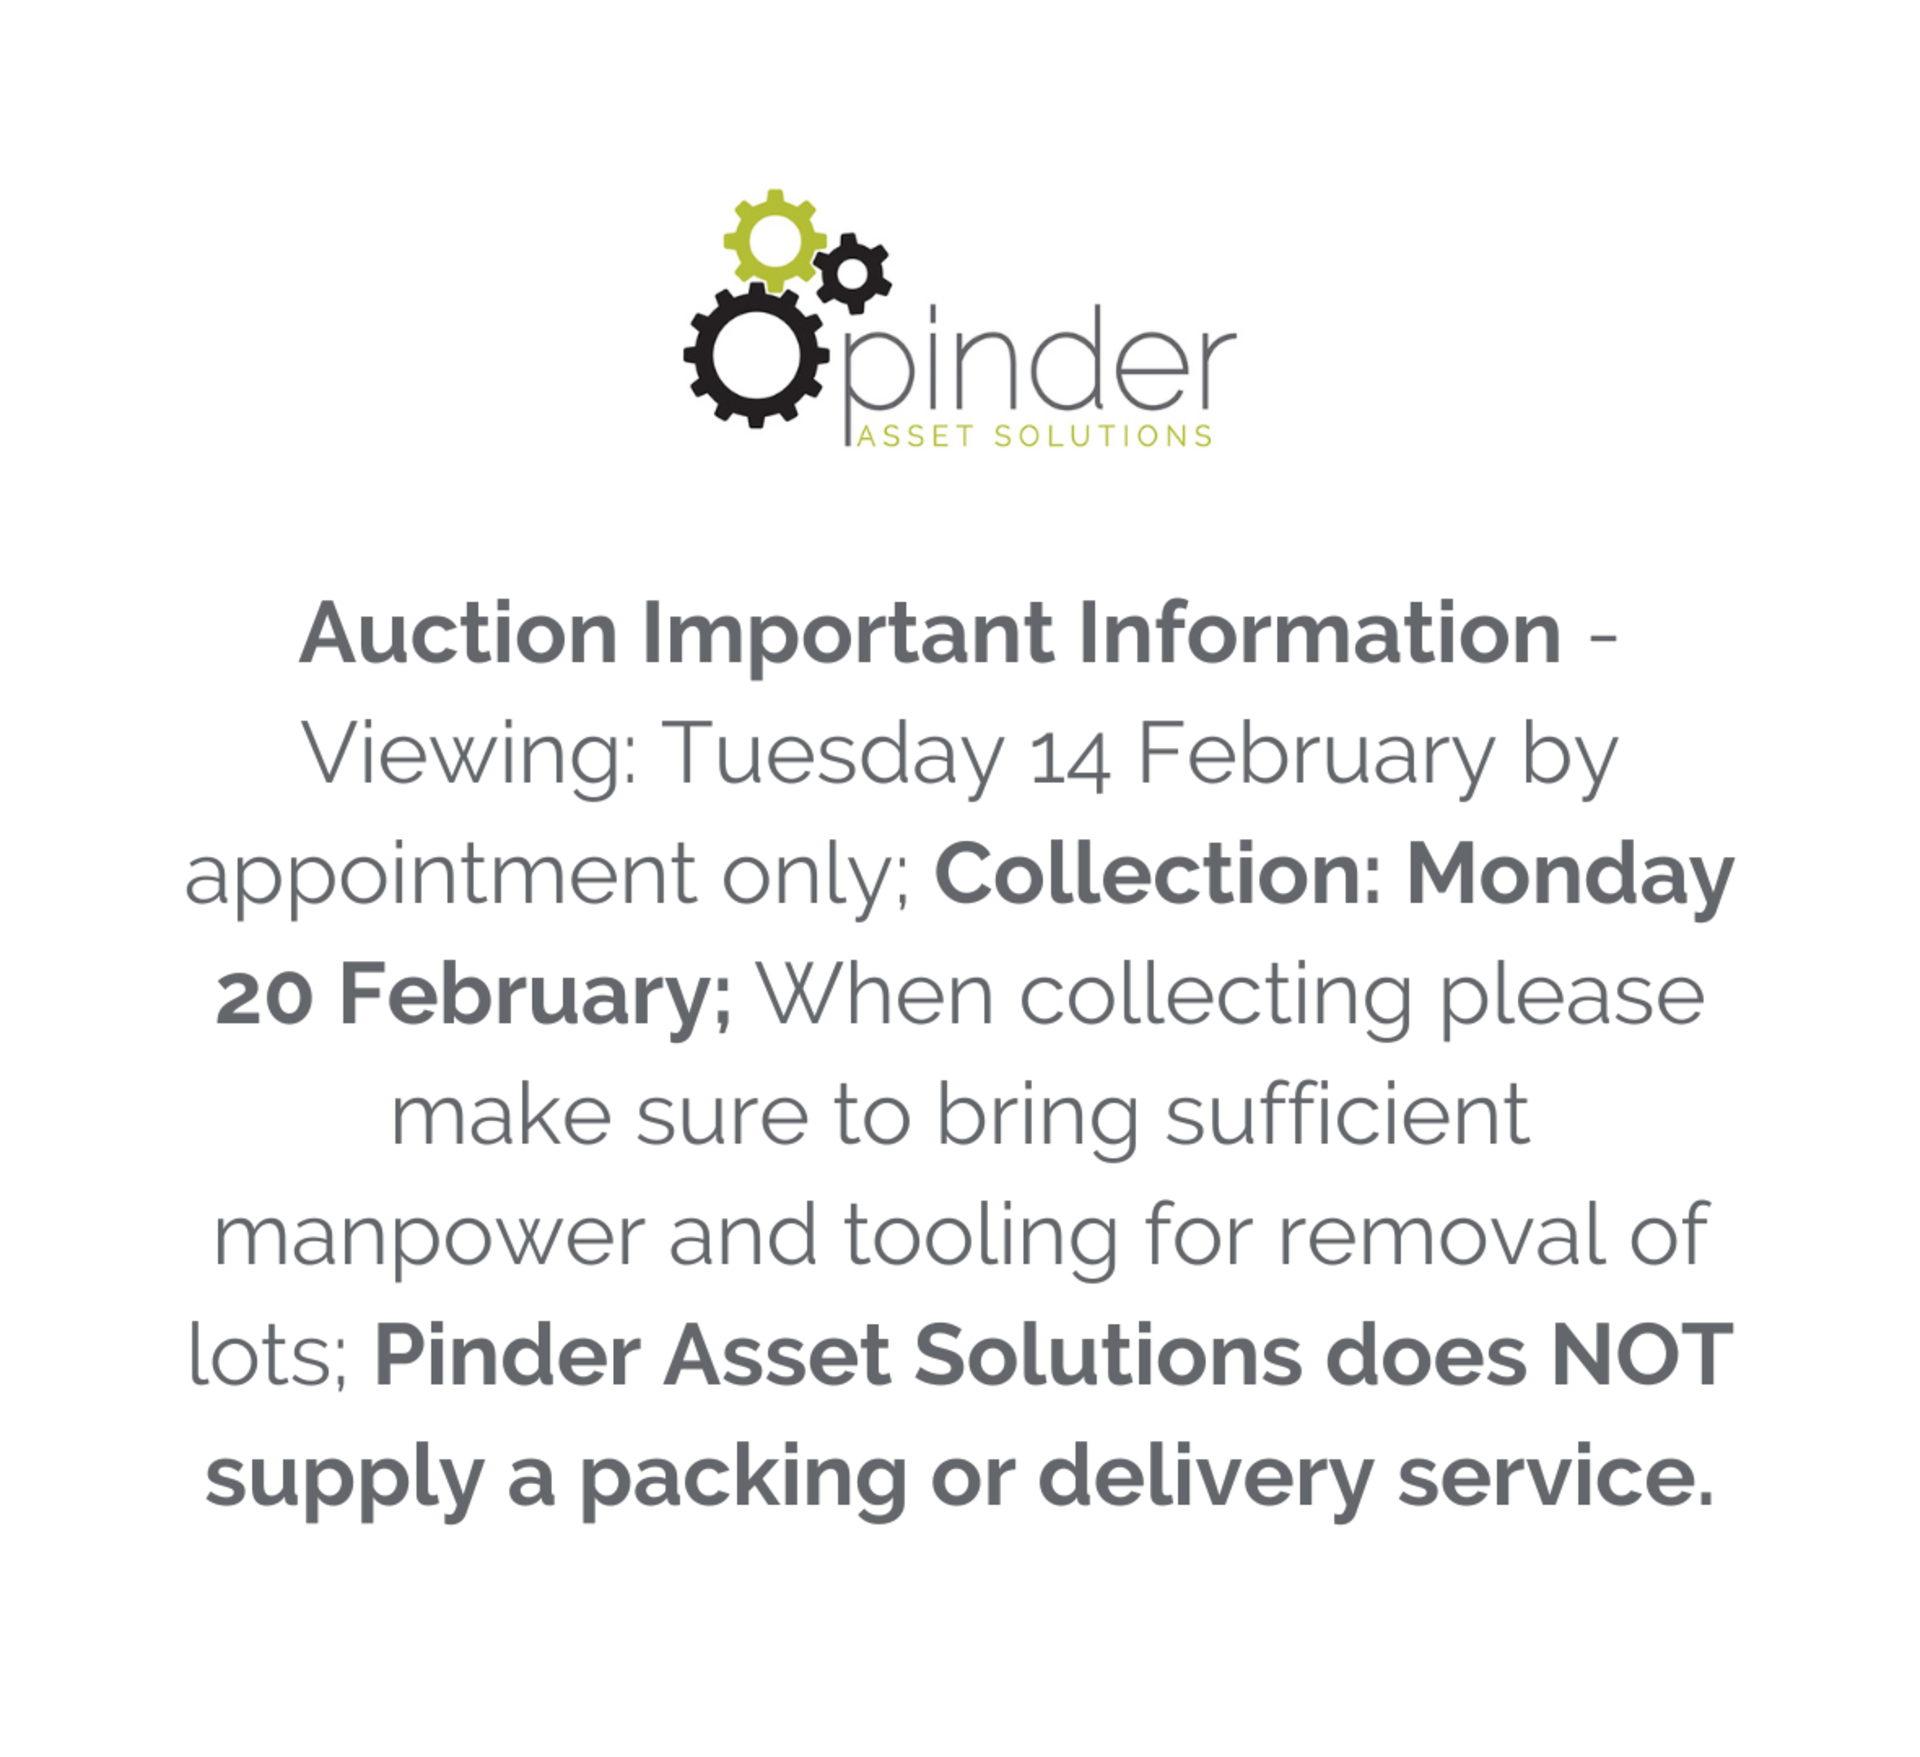 Auction Important Information - Viewing: Tuesday 14 February by appointment only; Collection: Monday